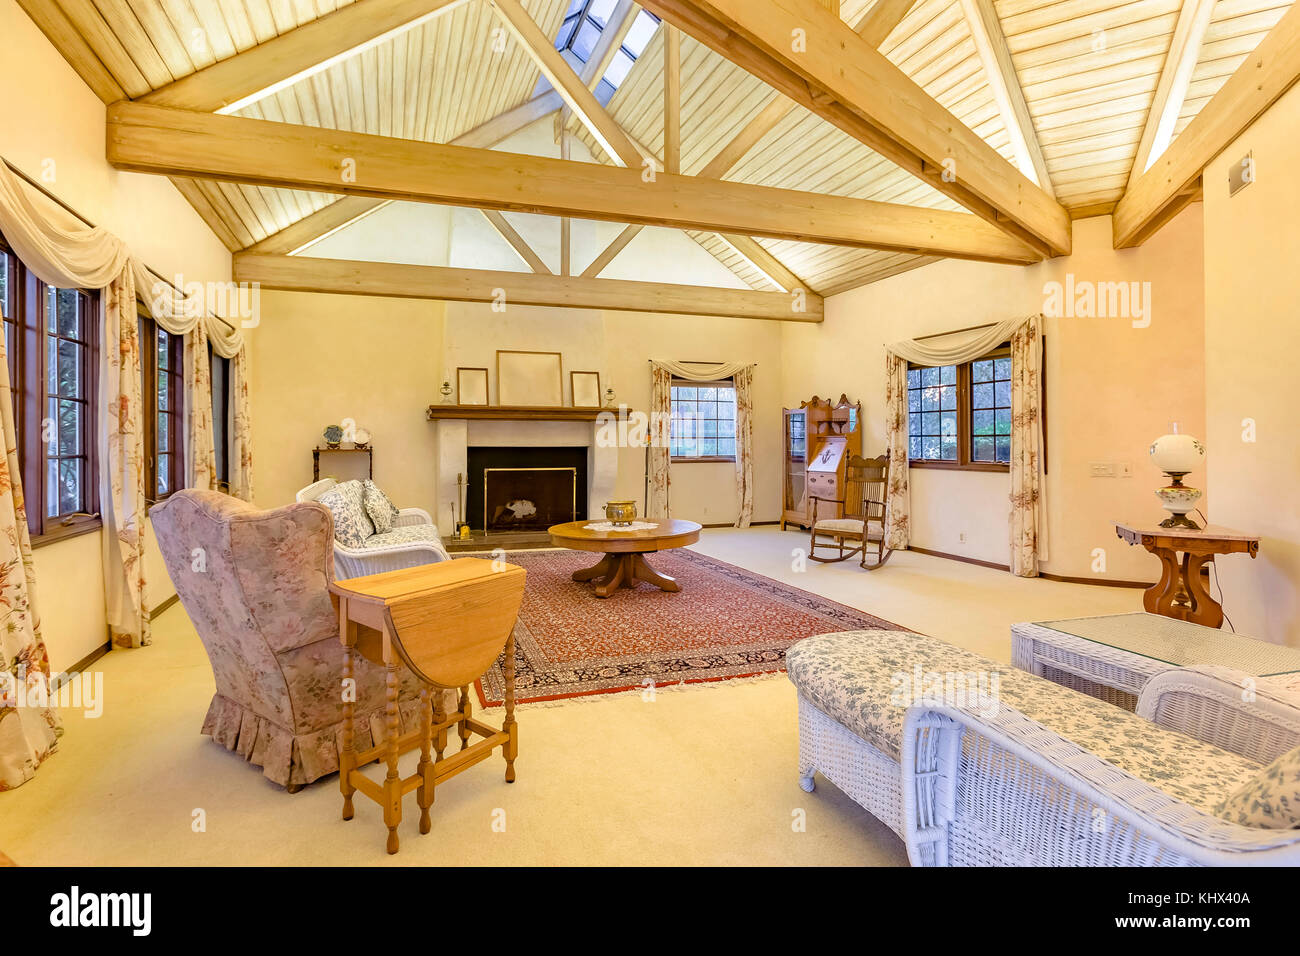 Bright Open And Warm Living Room With Vaulted Ceilings And Rug